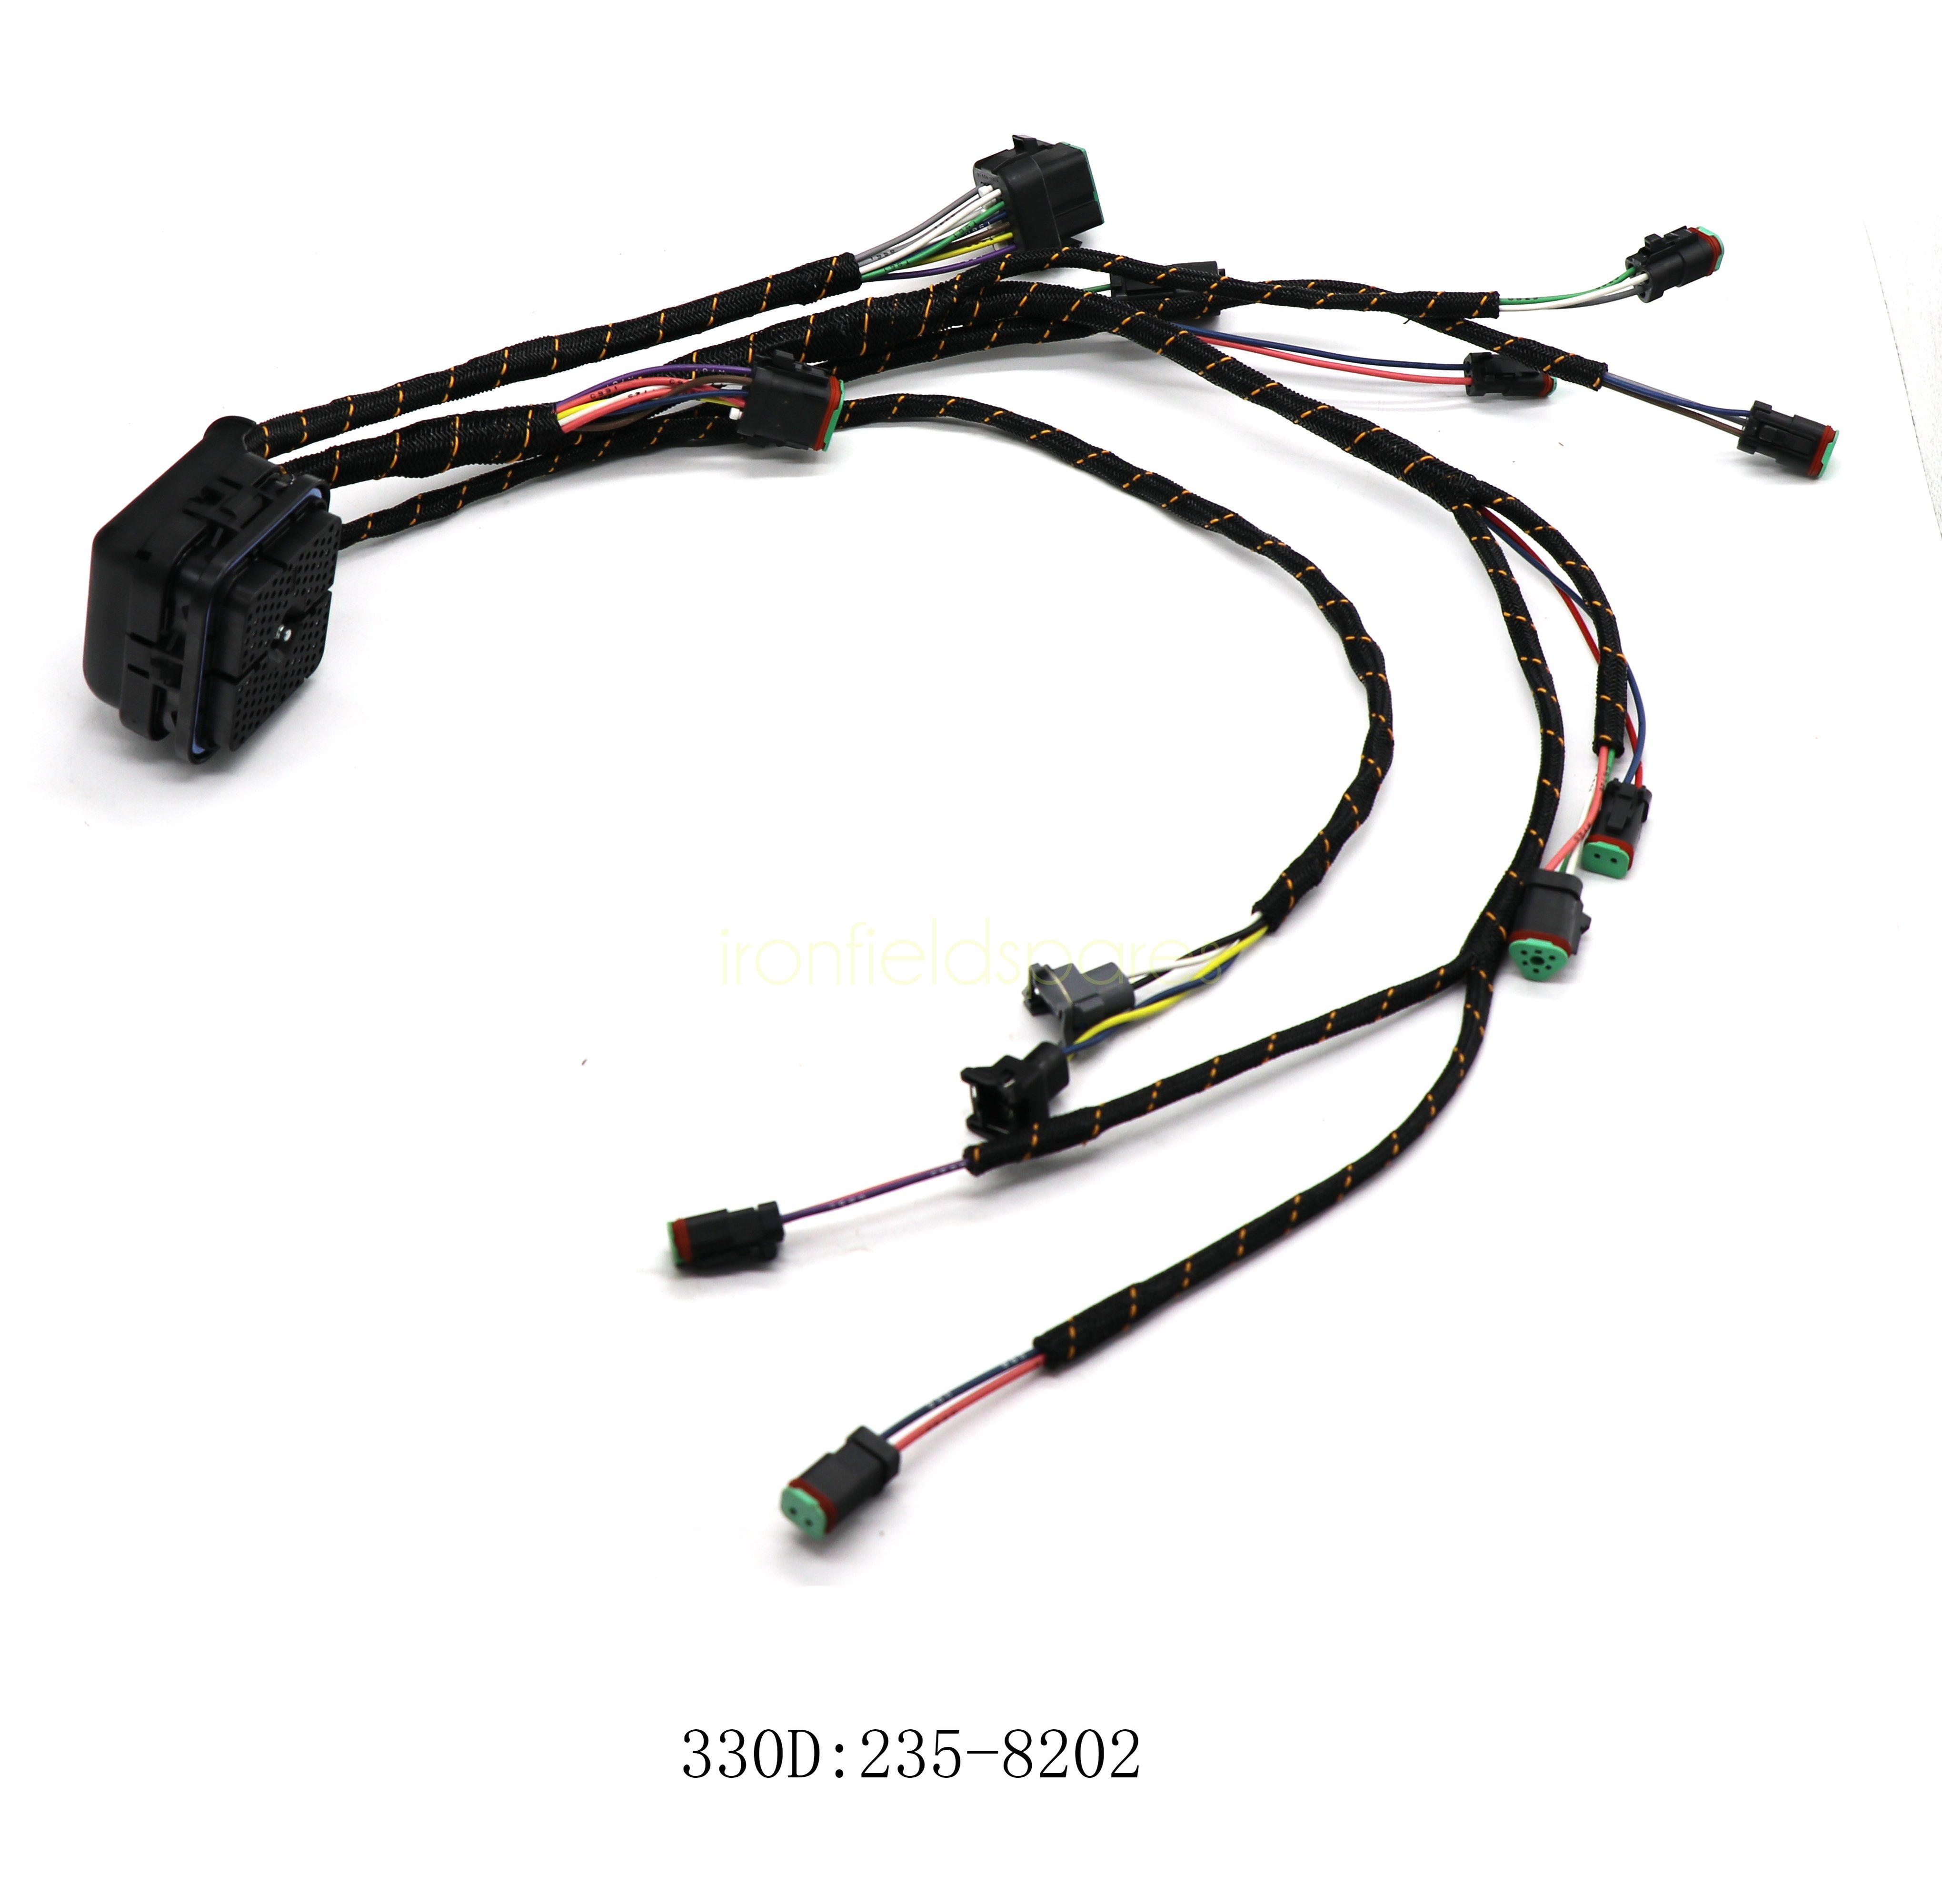 235-8202 CATERPILLAR CAT 330D Engine Wire Harness for C9